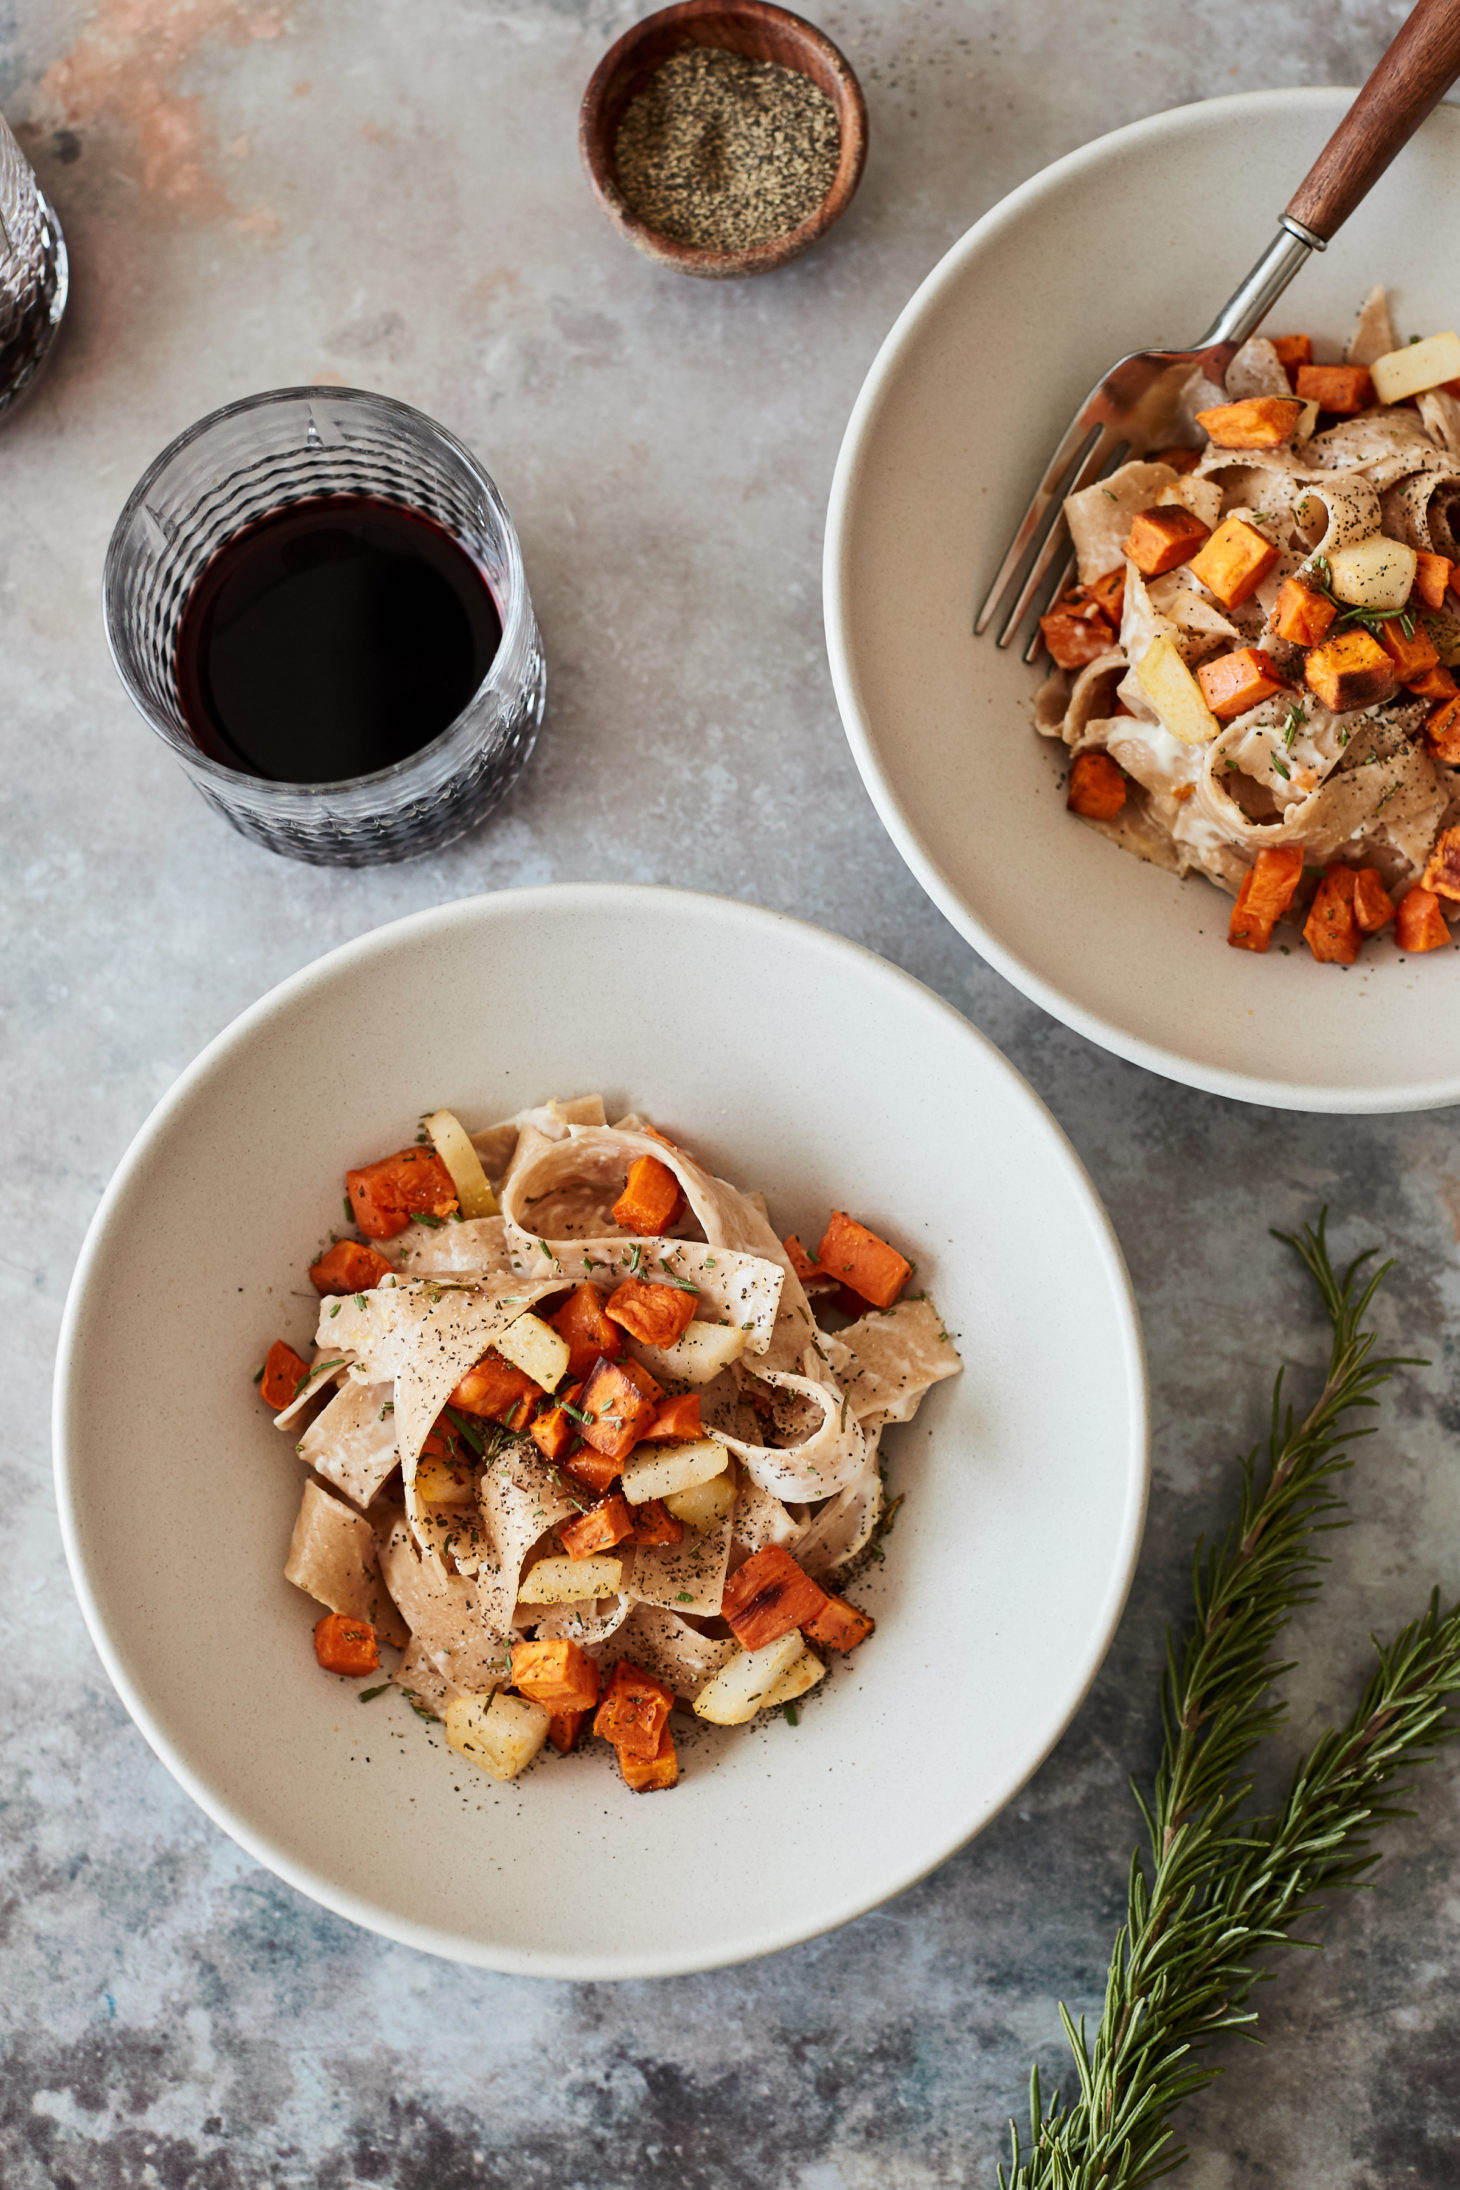 Image of two bowls of pasta with roasted orange sweet potato and a glass of red wine.